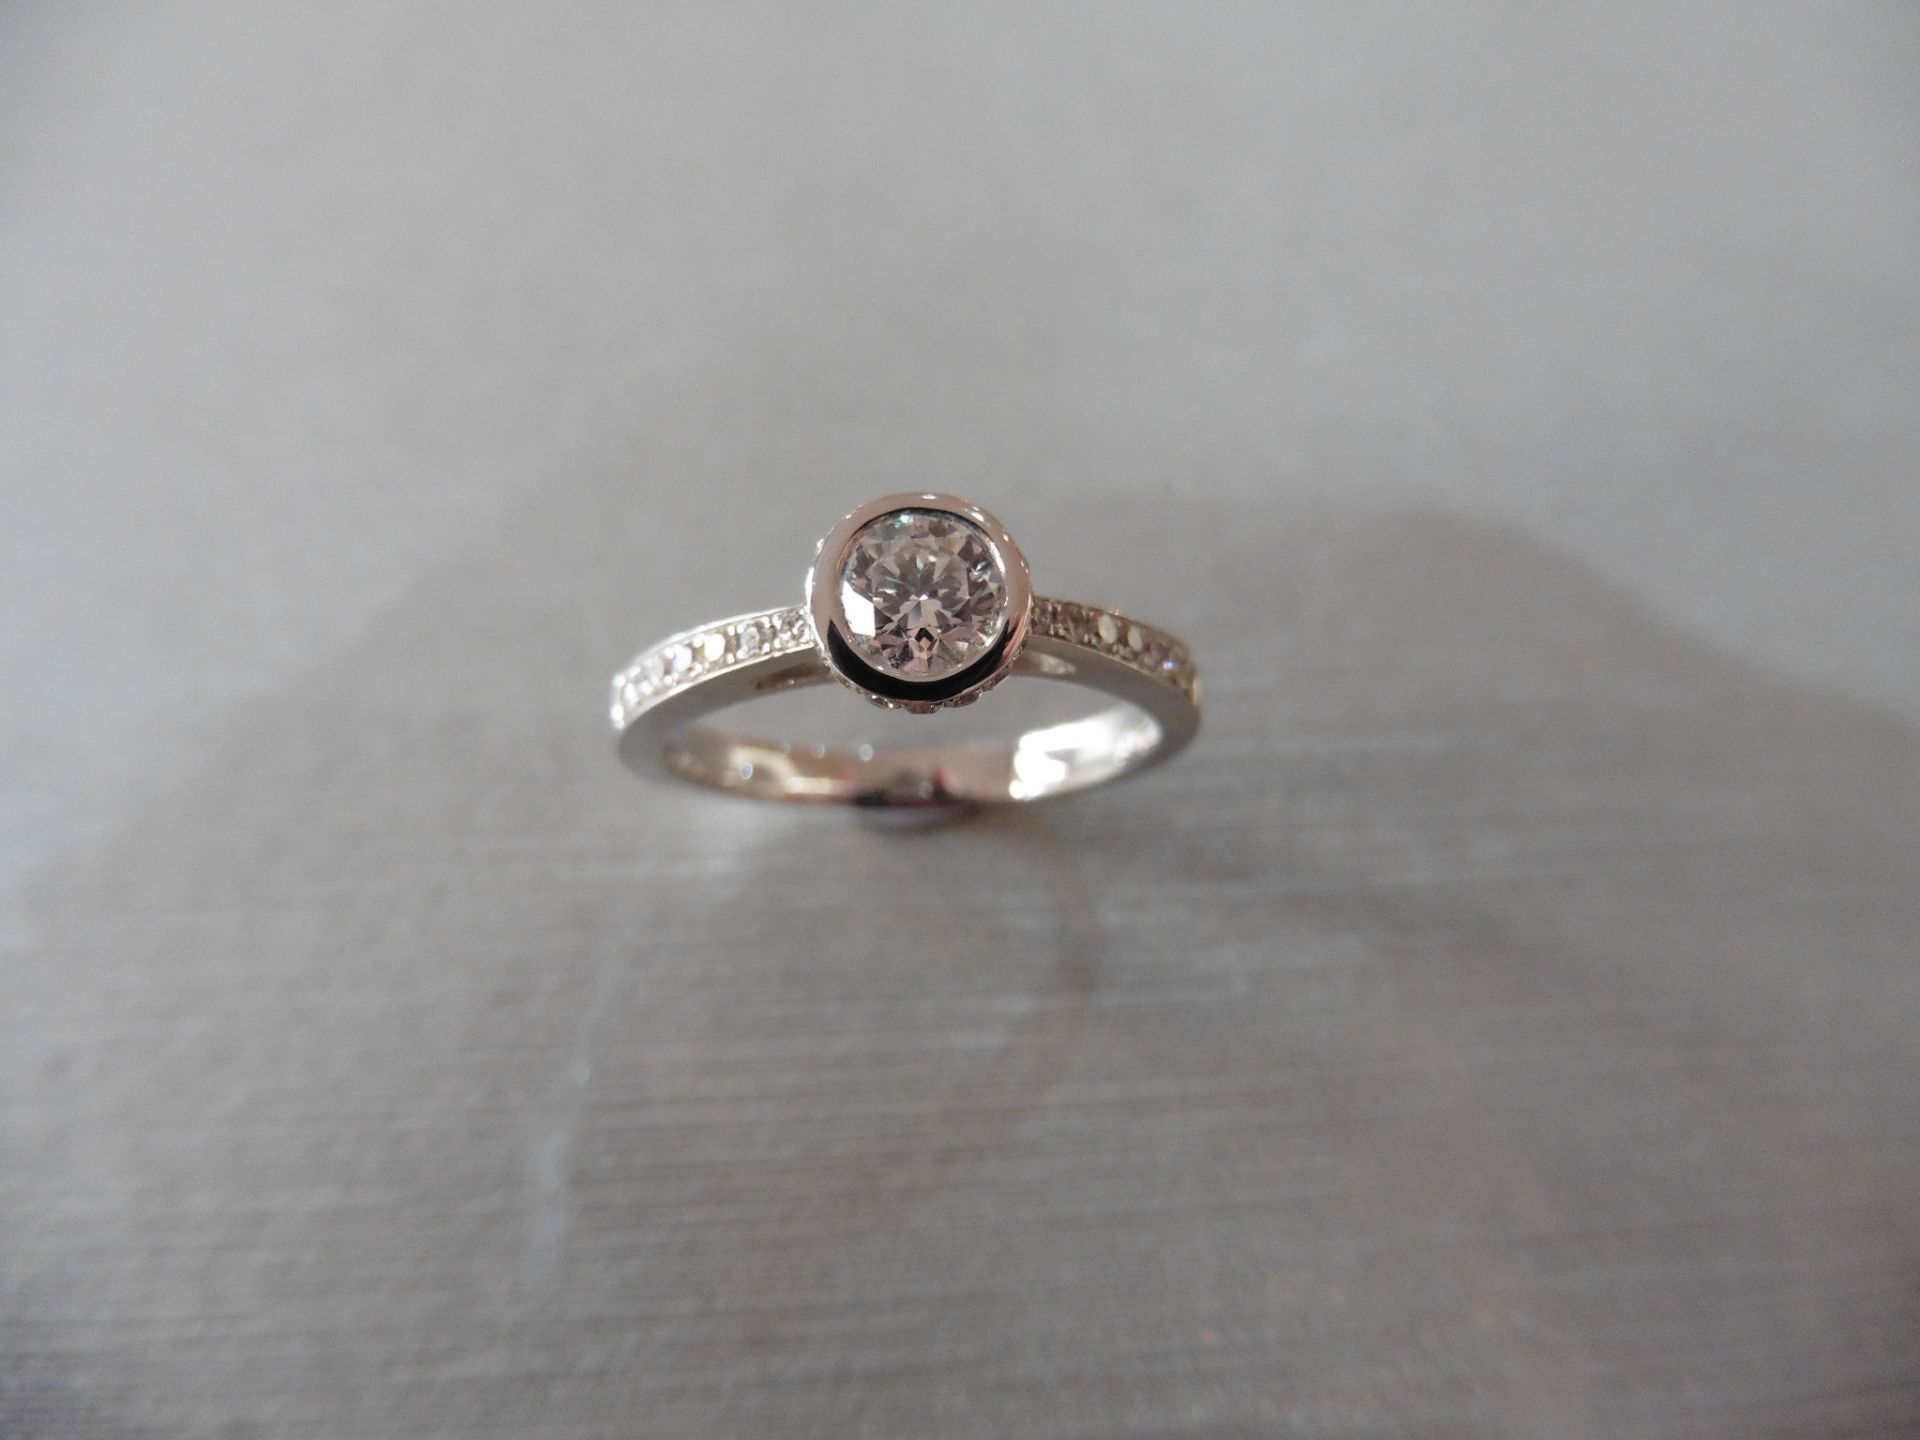 18ct white gold diamond set solitaire ring with a Brilliant cut diamond weighing 0.41ct secured in a - Image 4 of 4